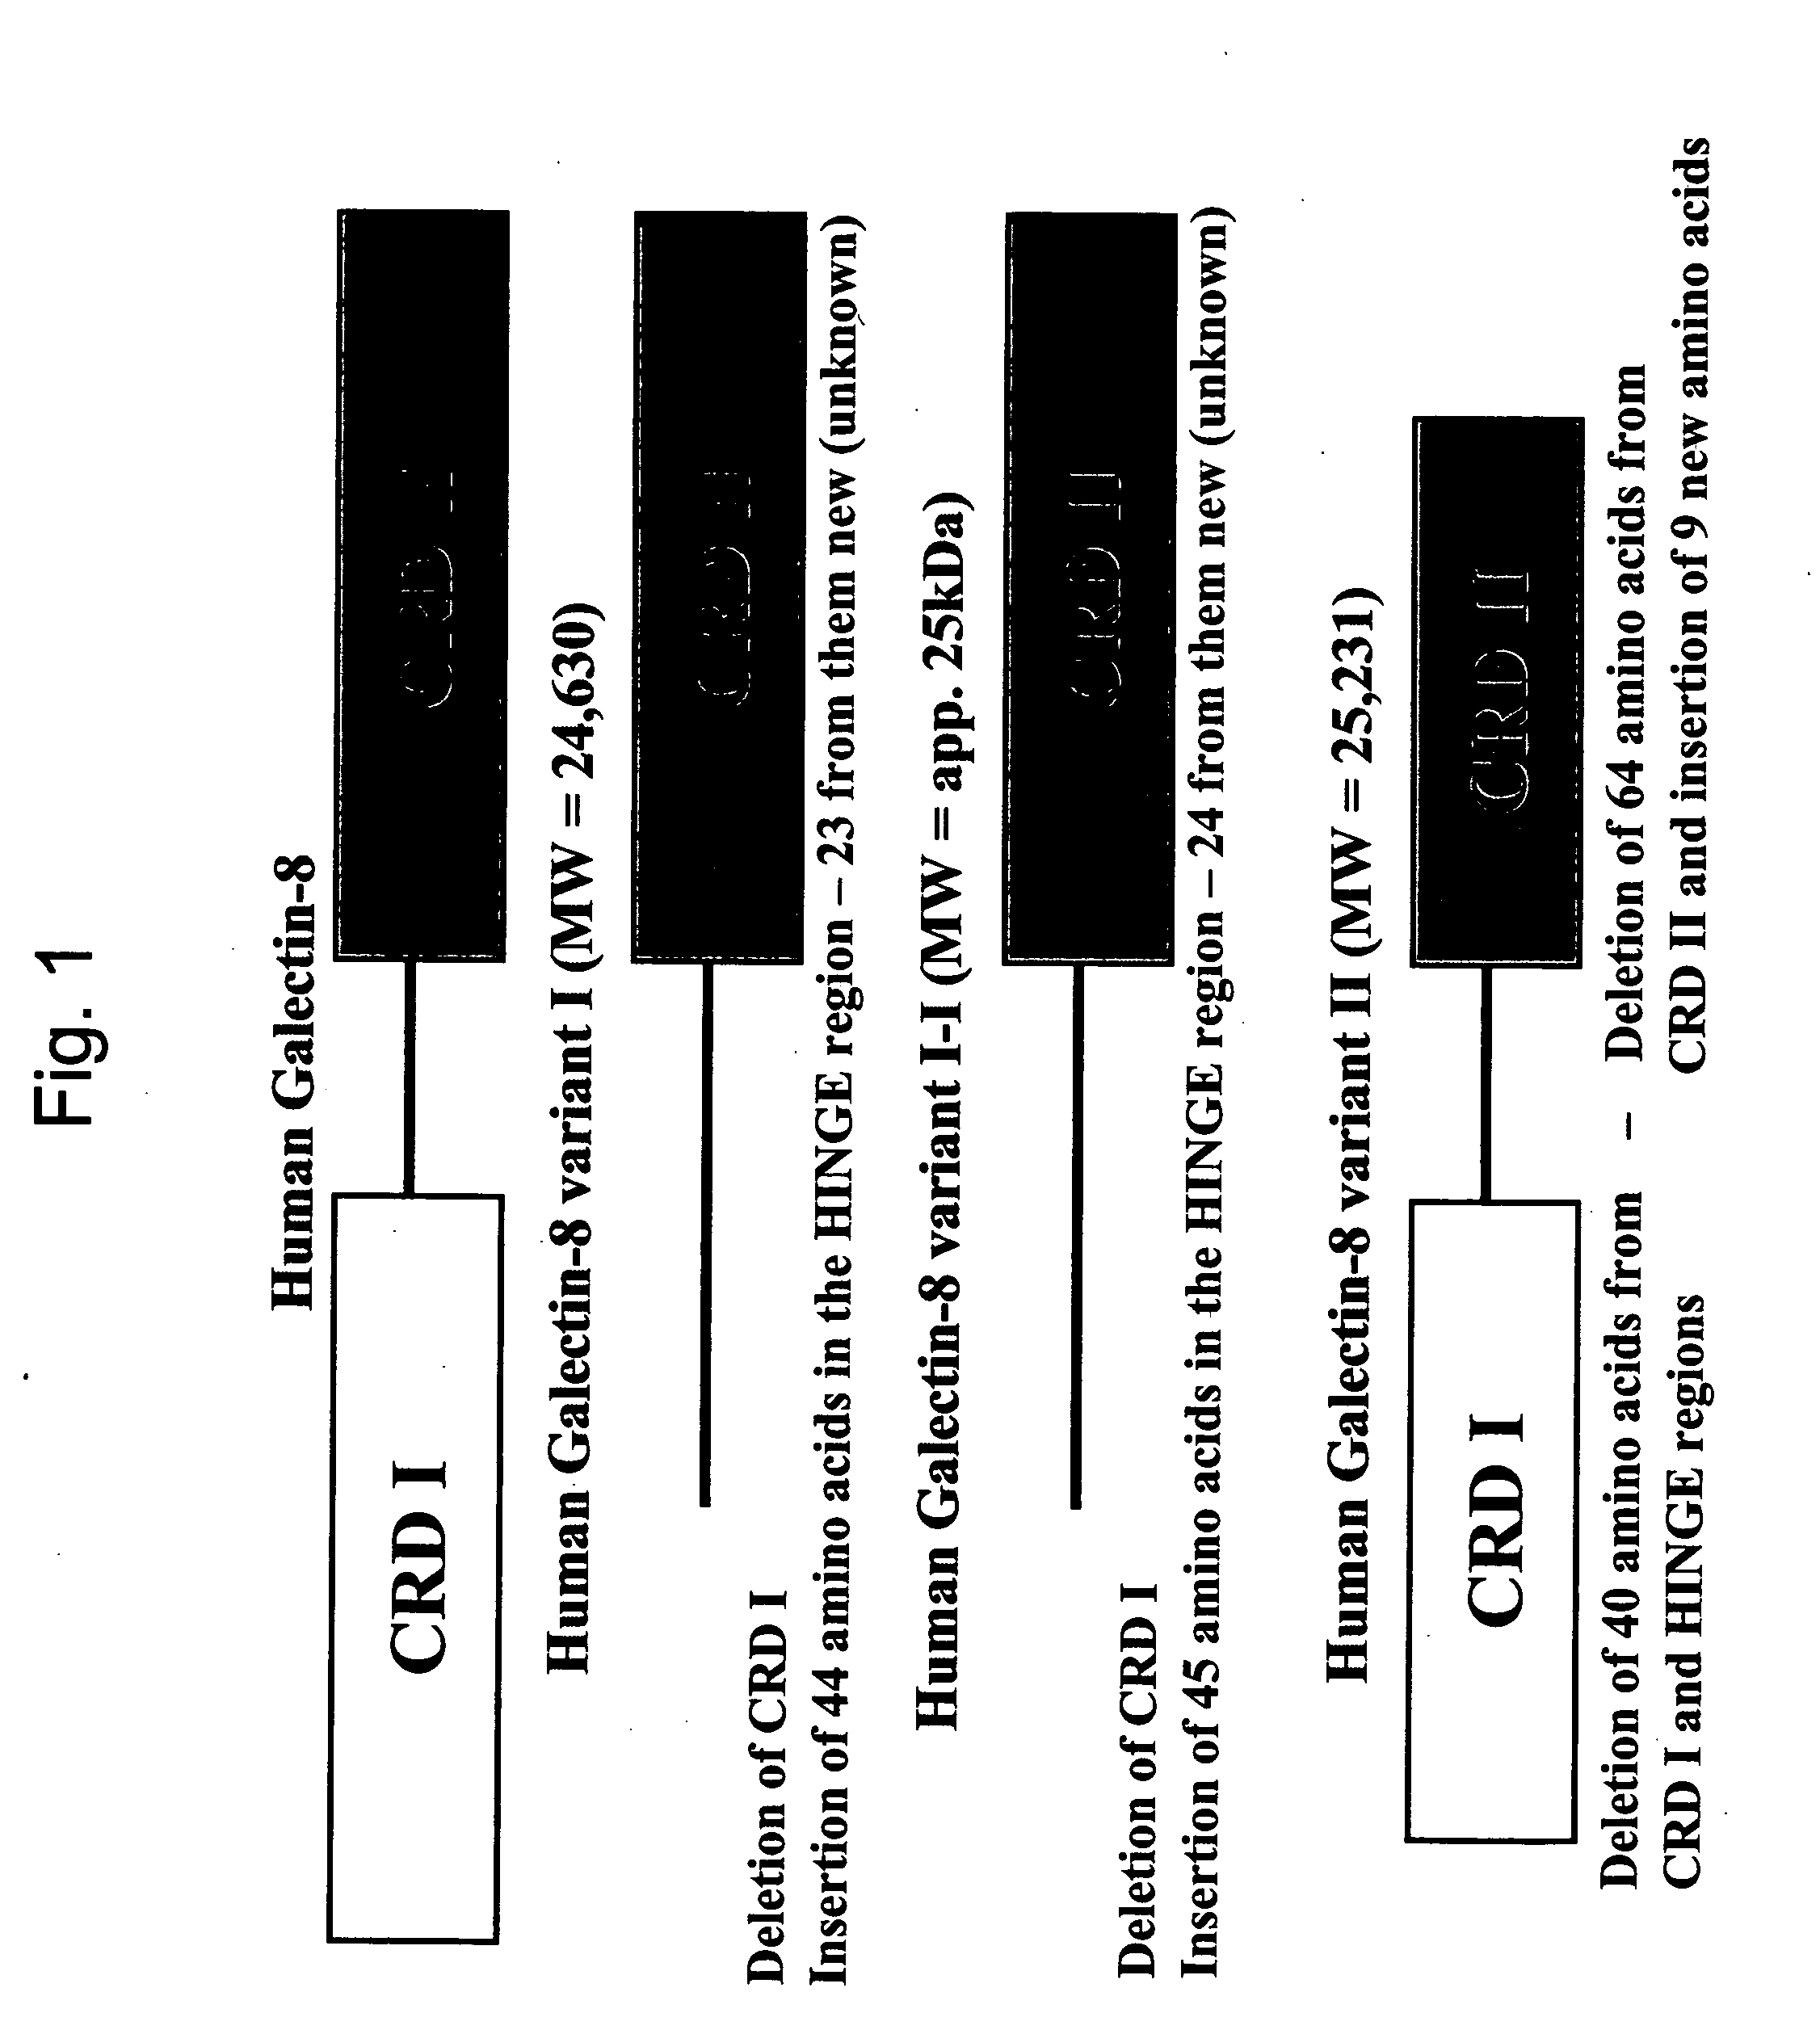 Novel galectin sequences and compositions and methods utilizing same for treating or diagnosing arthritis and other chronic inflammatory diseases